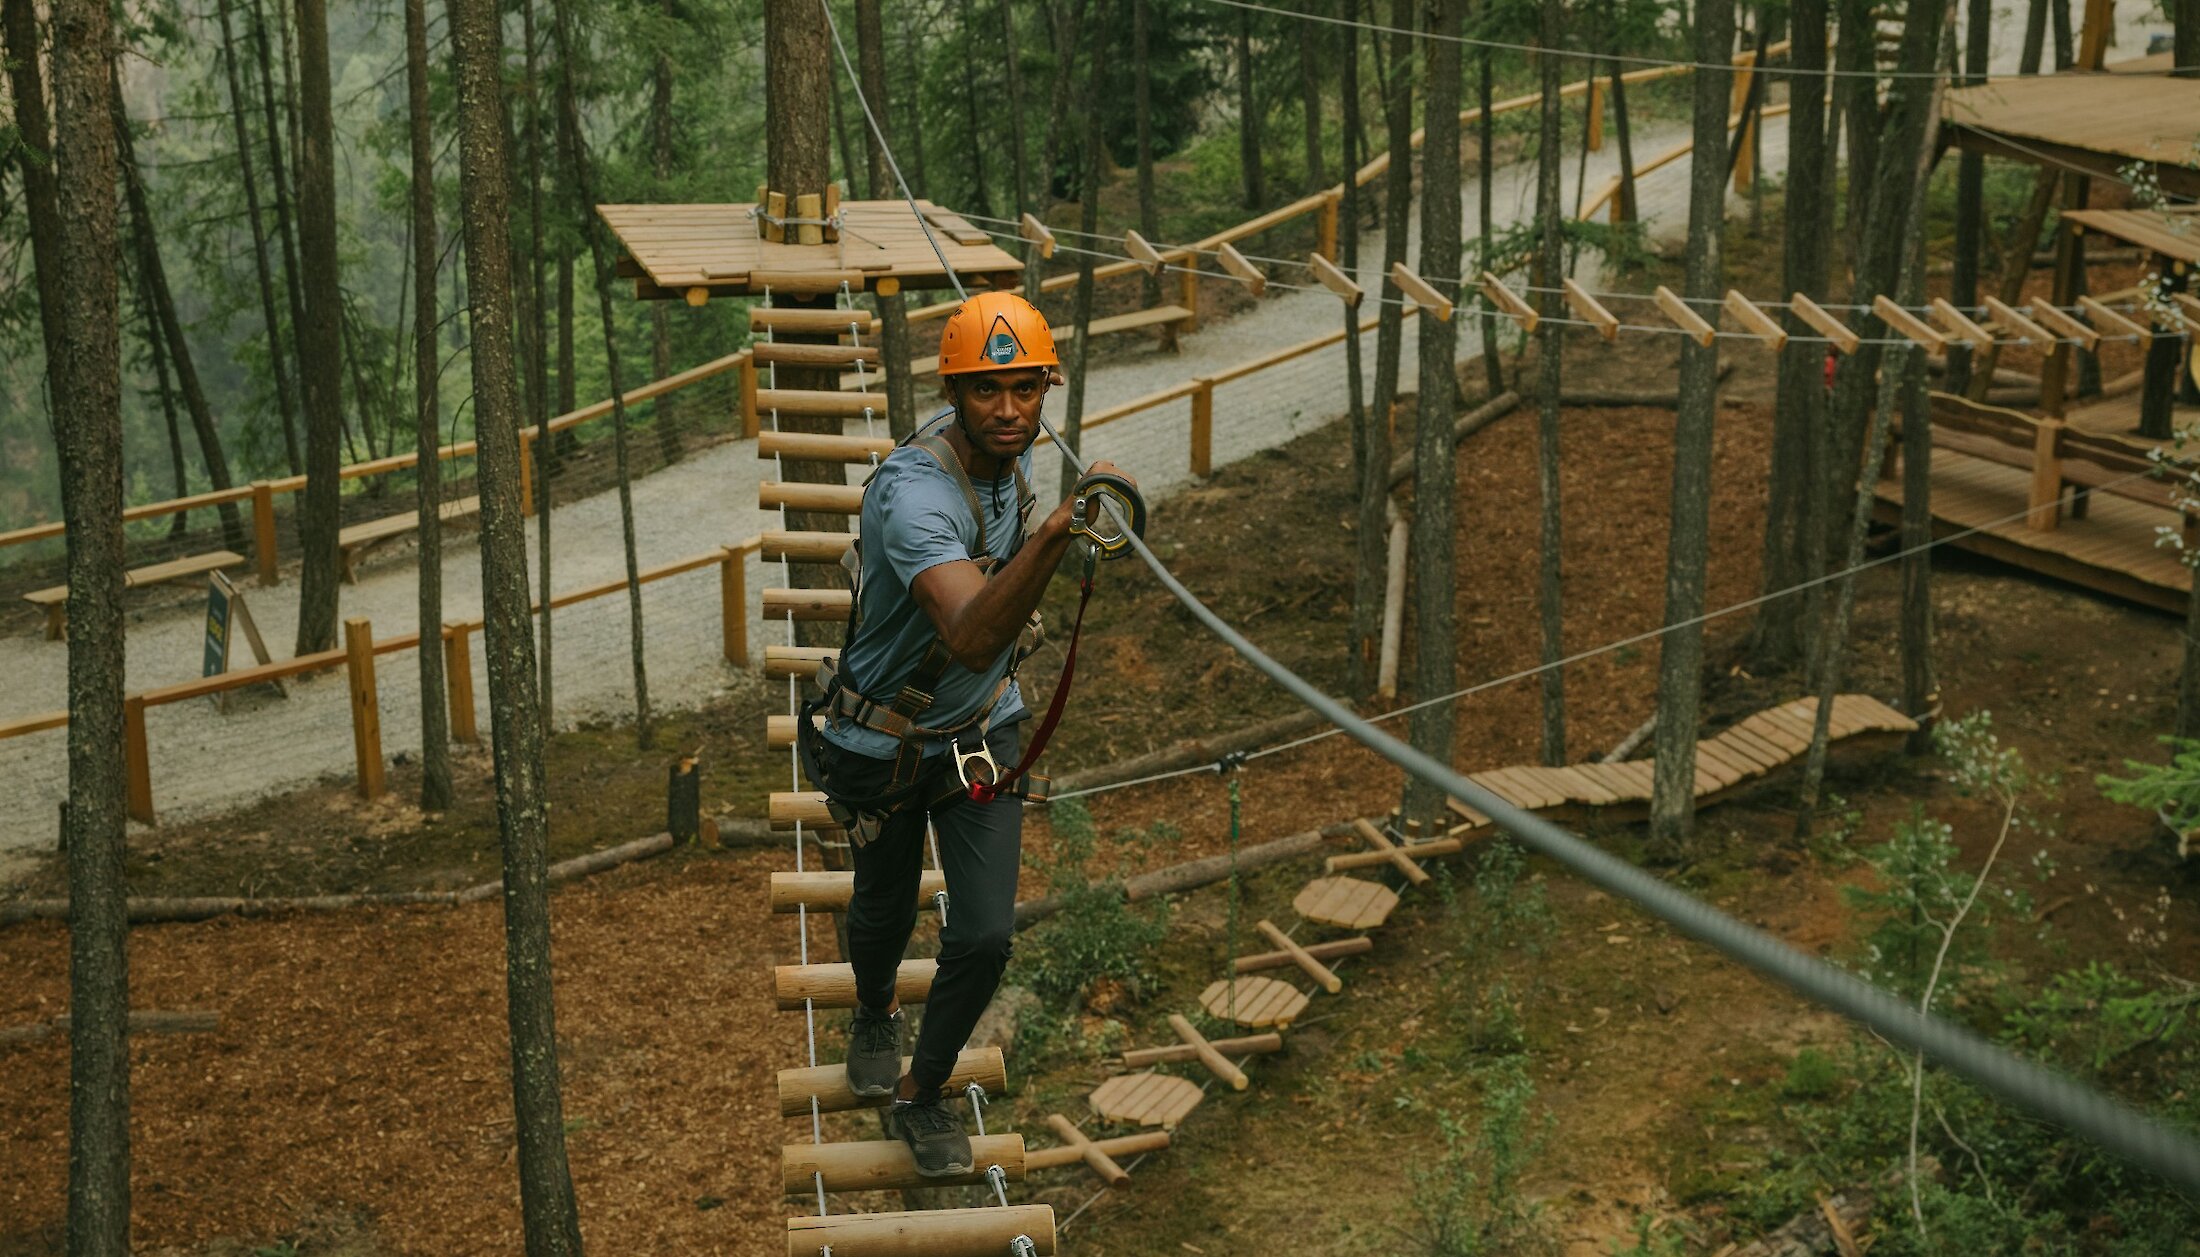 Enjoying the ropes course at the Golden Skybridge